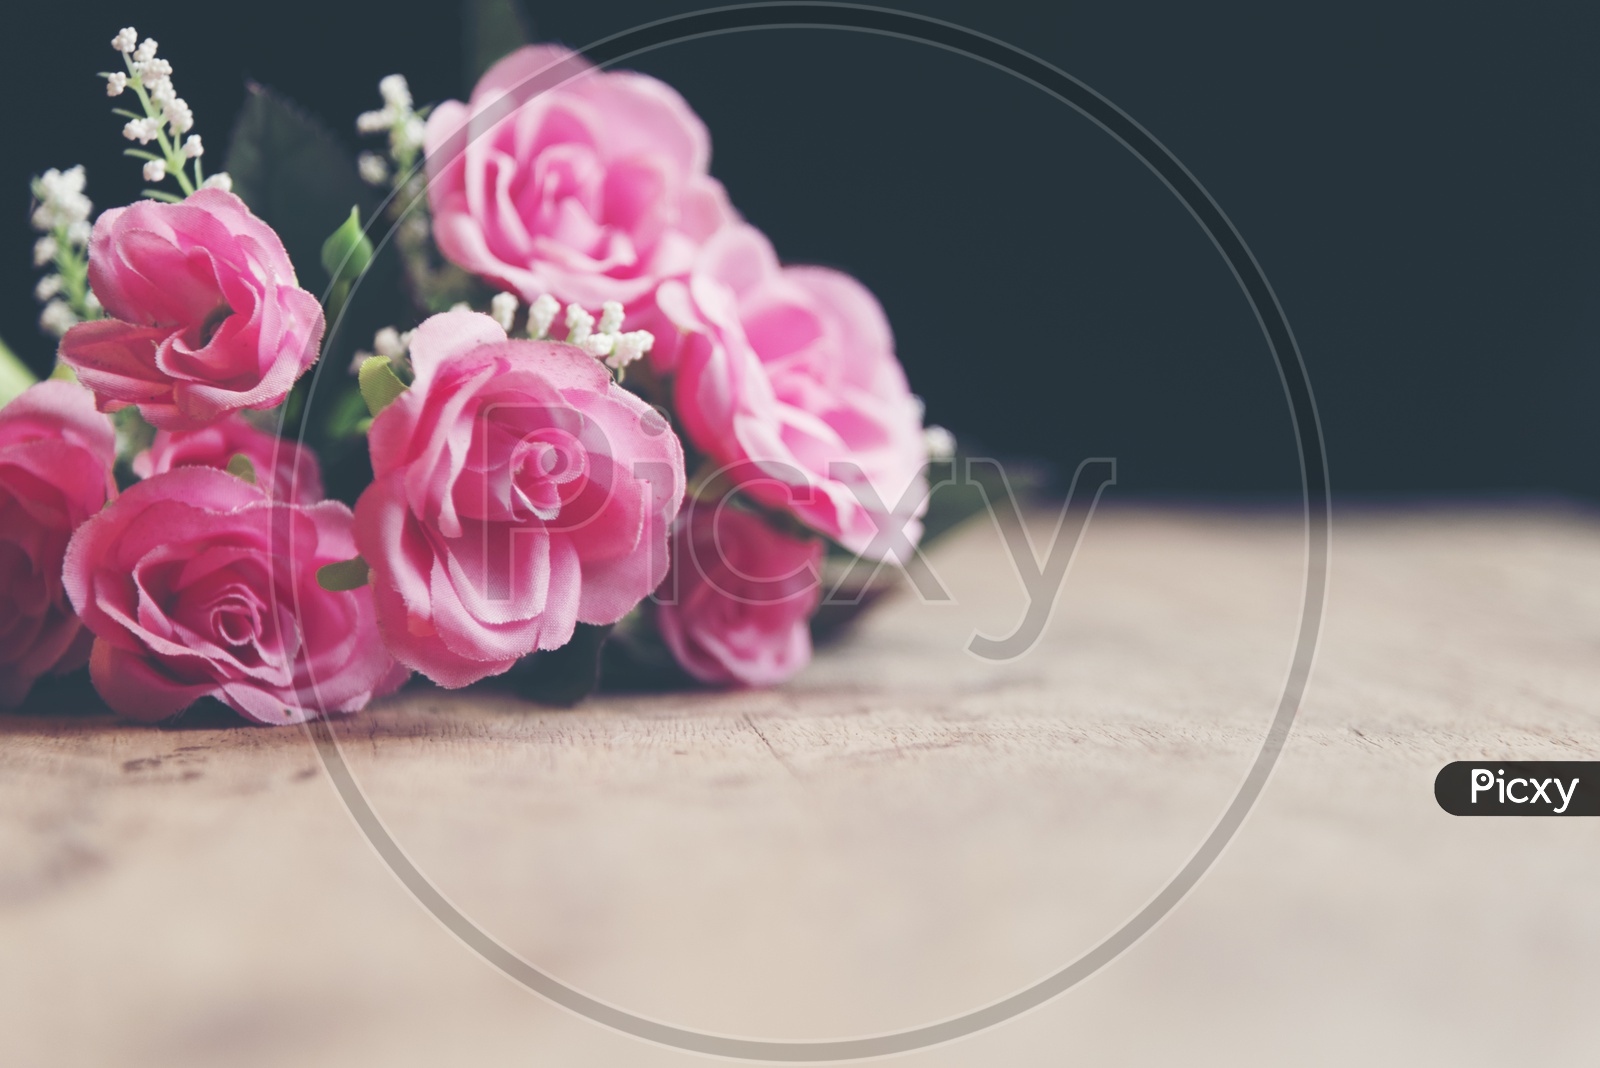 Close up of pink rose flowers - Valentine's Day Concept